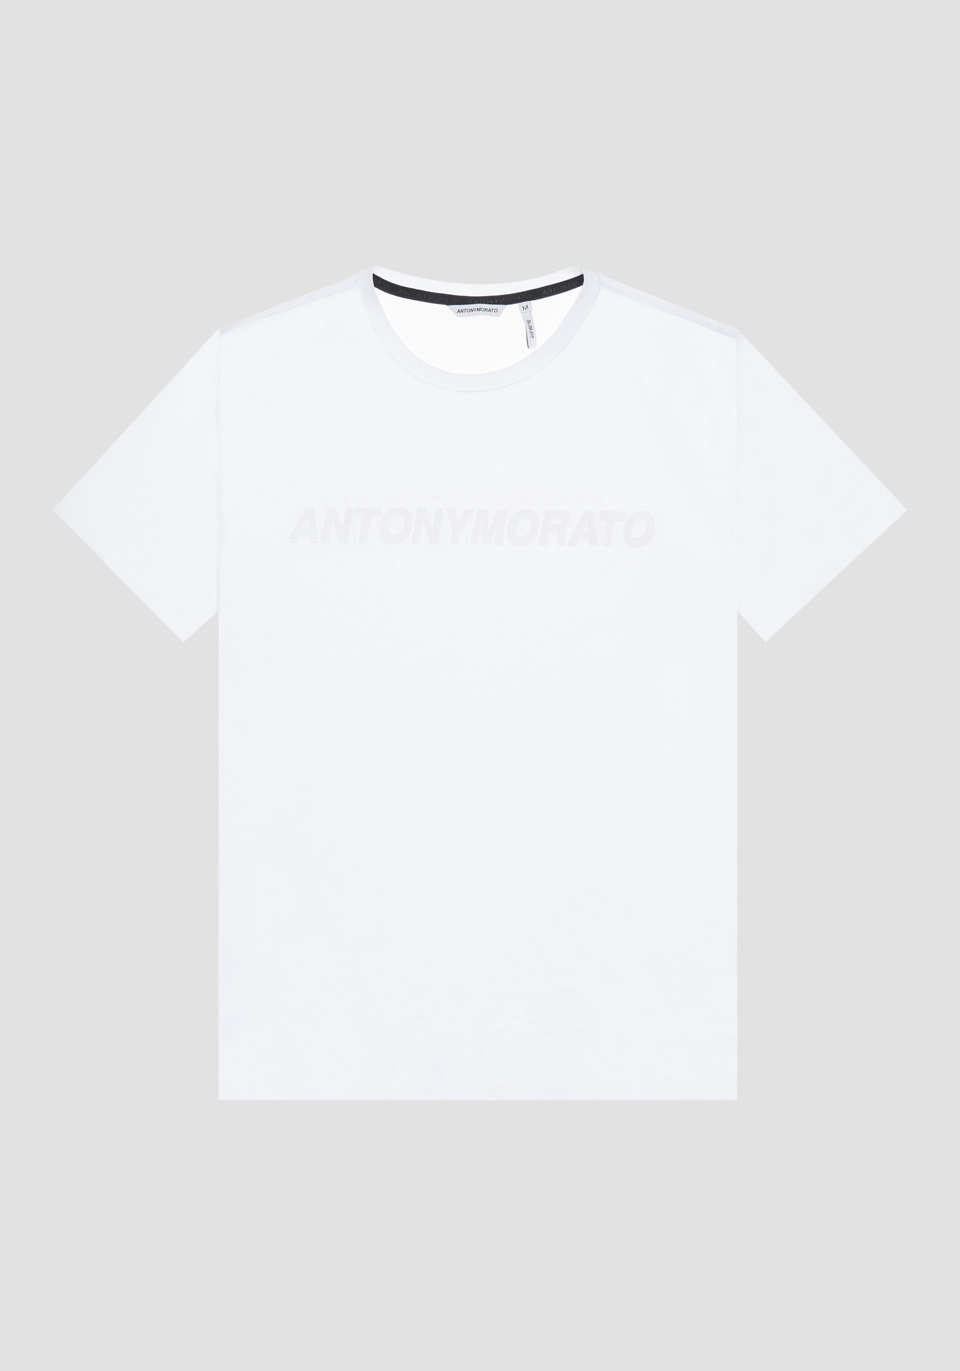 SLIM-FIT T-SHIRT IN PURE COTTON WITH PRINTED LOGO - Antony Morato Online Shop